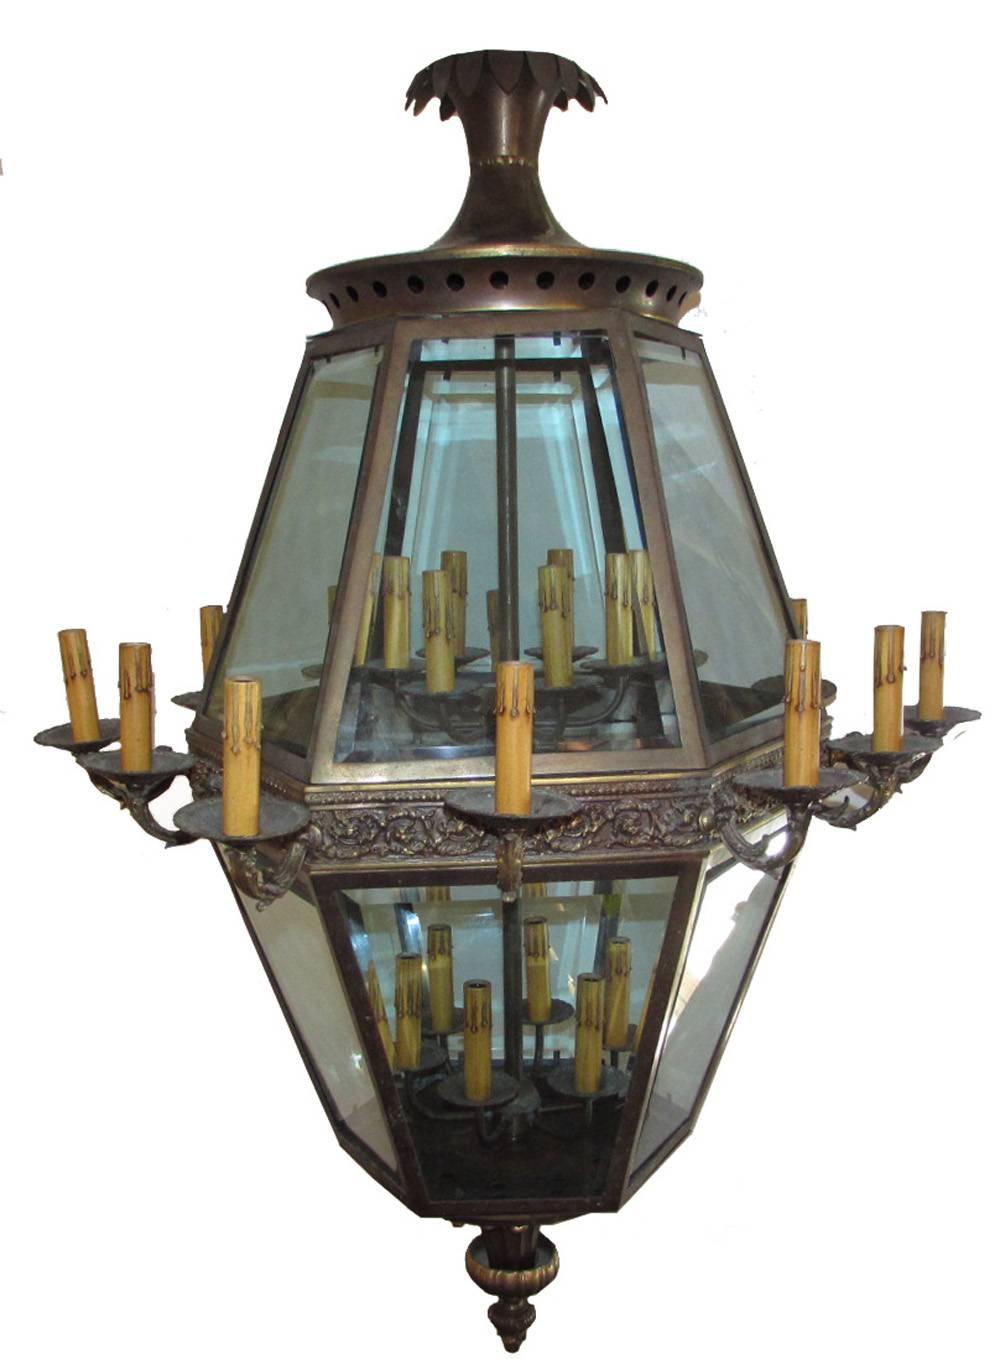 Antique Italian Monumental Pair of Louis XIV Genoa Palace Lanterns Circa 1920.
Fantastic pair of monumental lanterns, from a Genoa palace, hexagonal shape with beveled glasses. Louis XIV style, brass decorations and details. 
A total of 24 lights